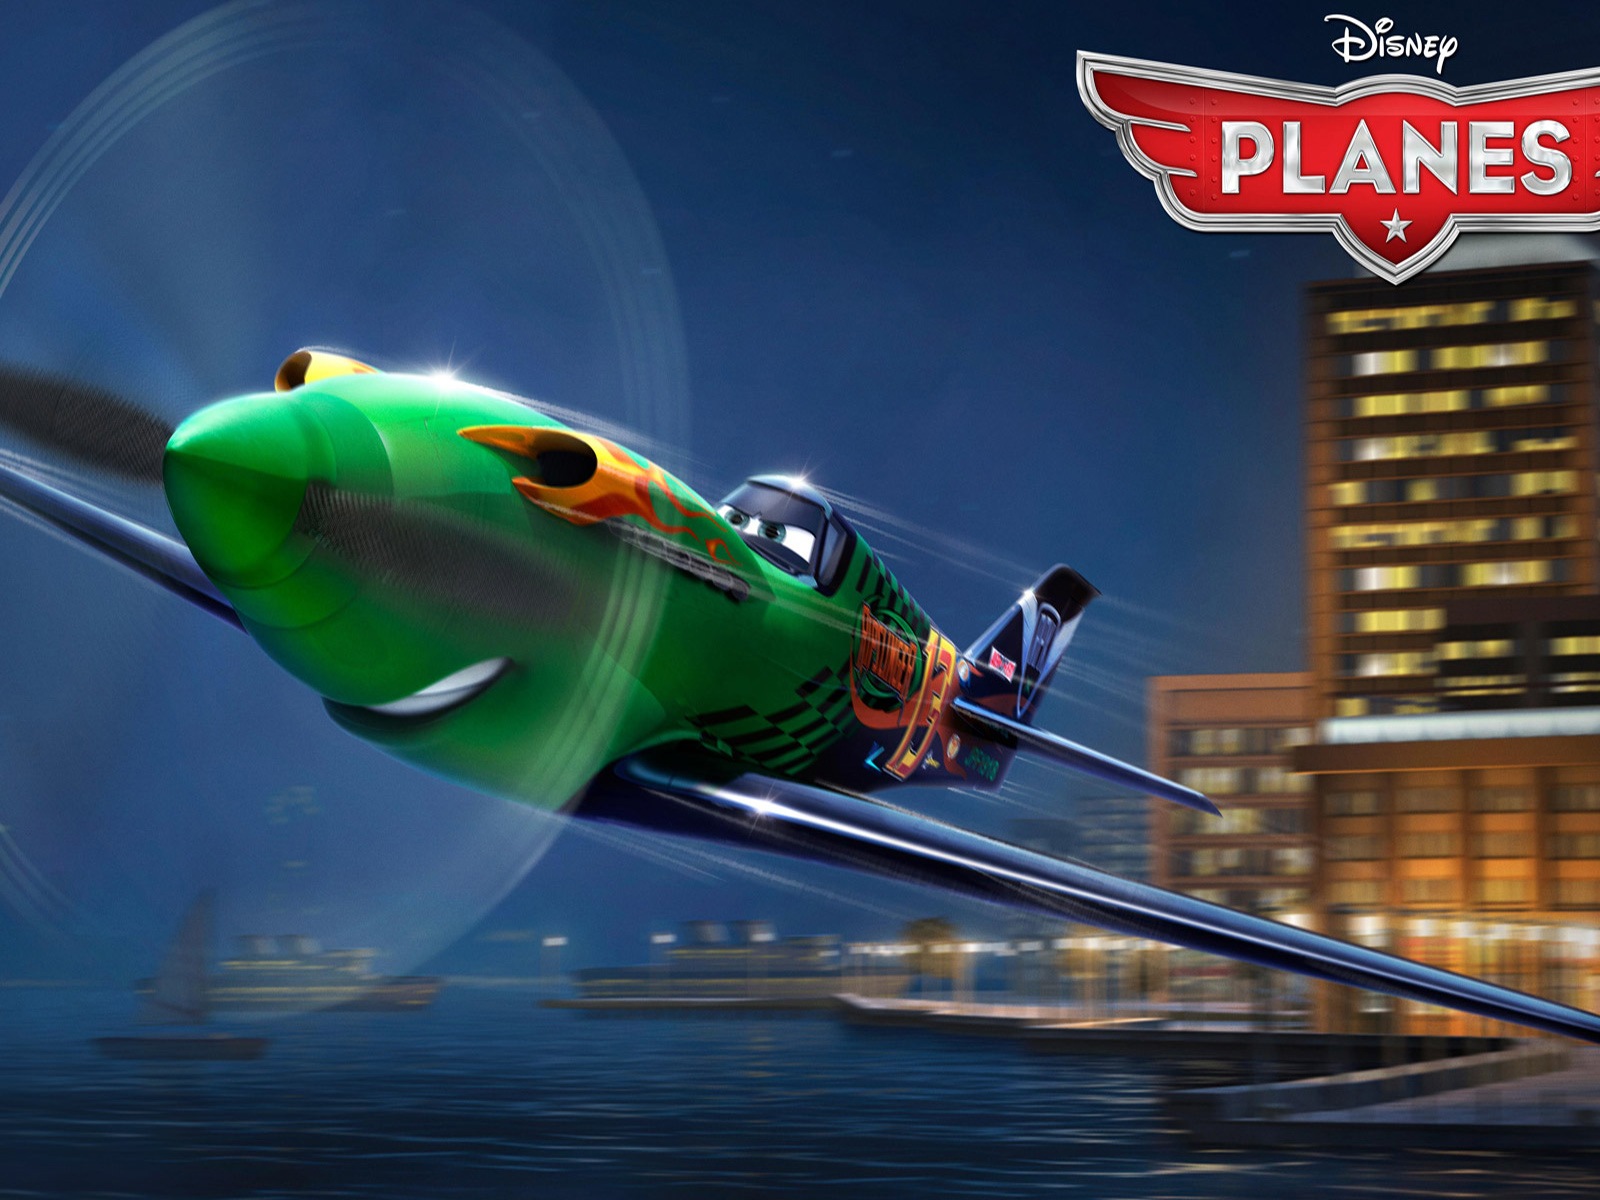 Planes 2013 HD wallpapers #14 - 1600x1200